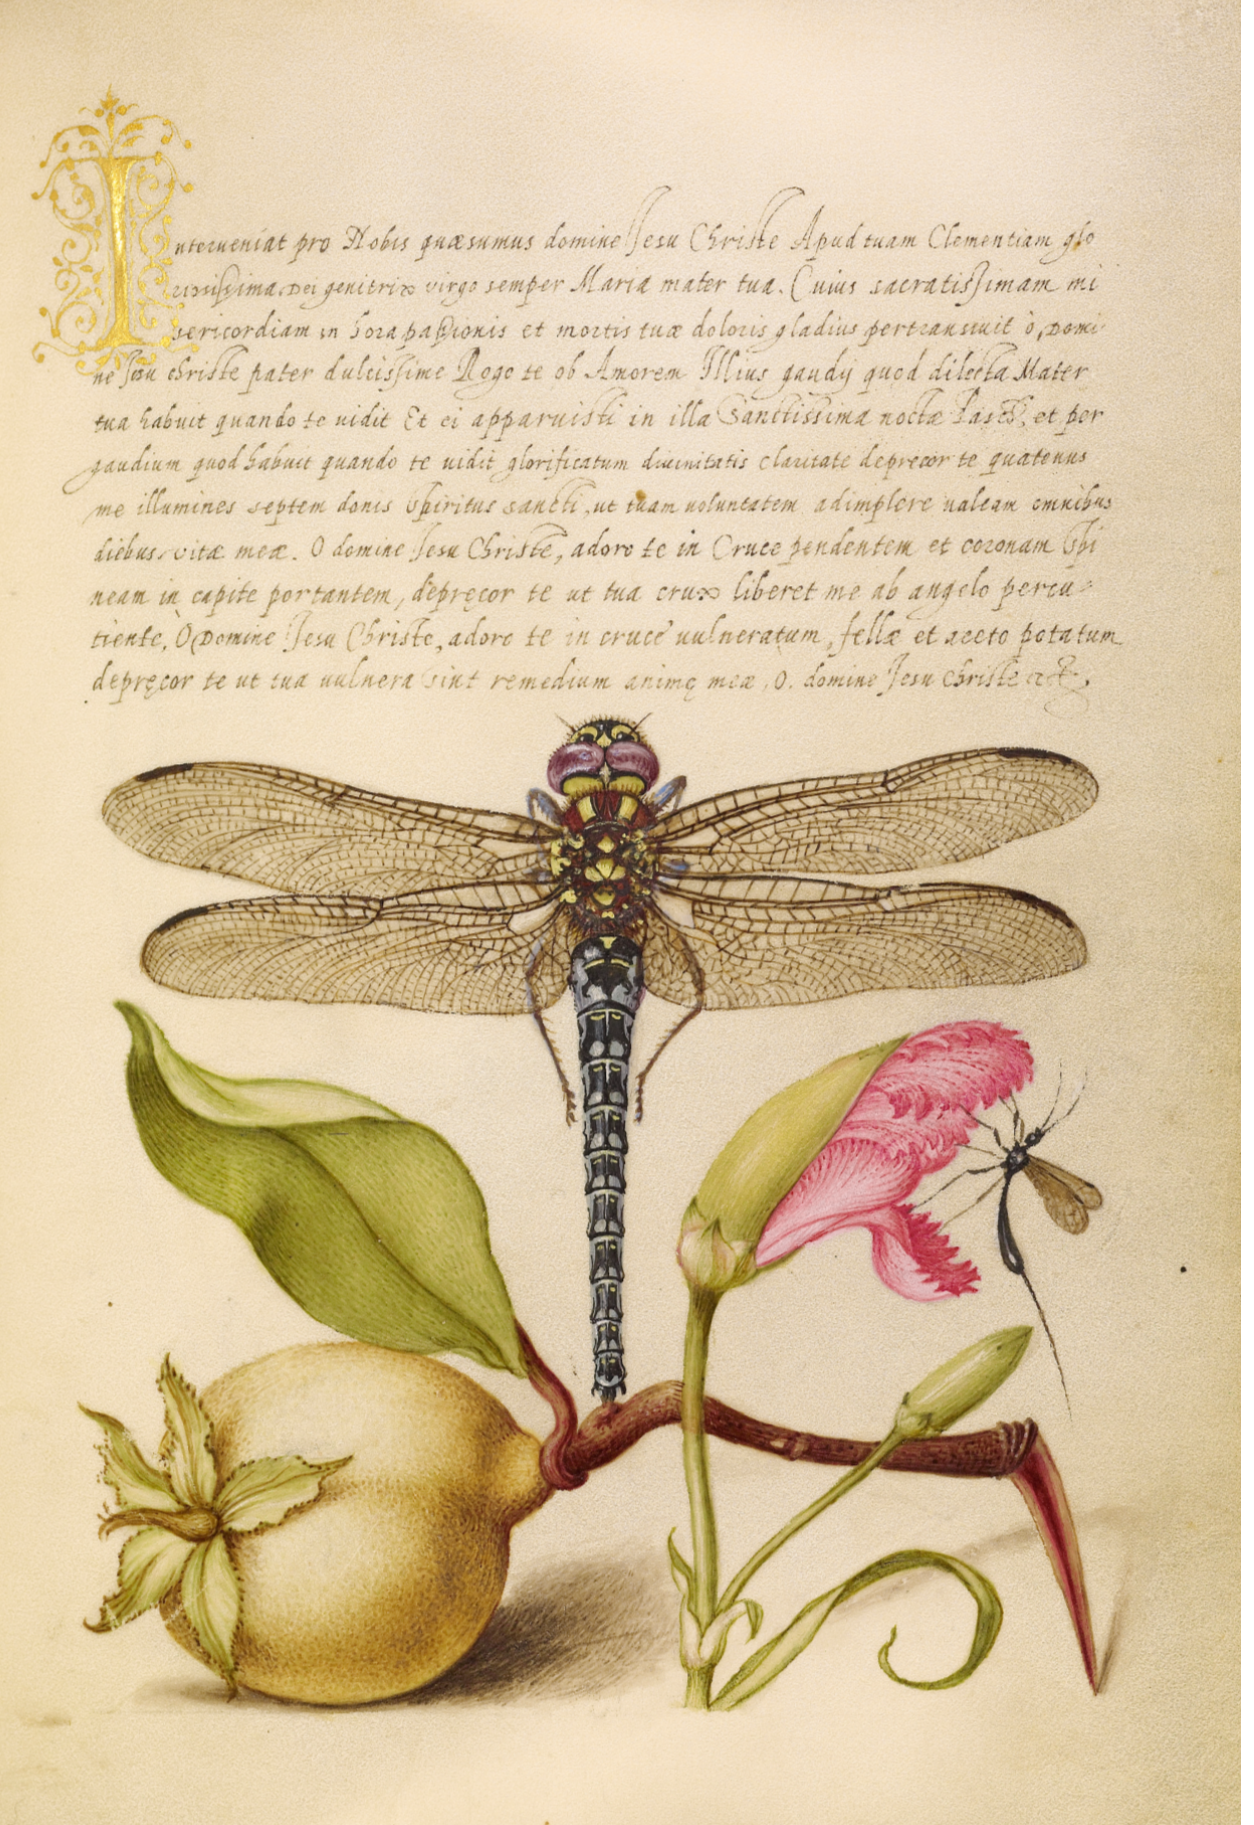 Dragonfly, Pear, Carnation, and Insect - Joris Hoefnagel & Georg Bocskay , plate from Mira calligraphiae monumenta , 1561-62 - Postcard